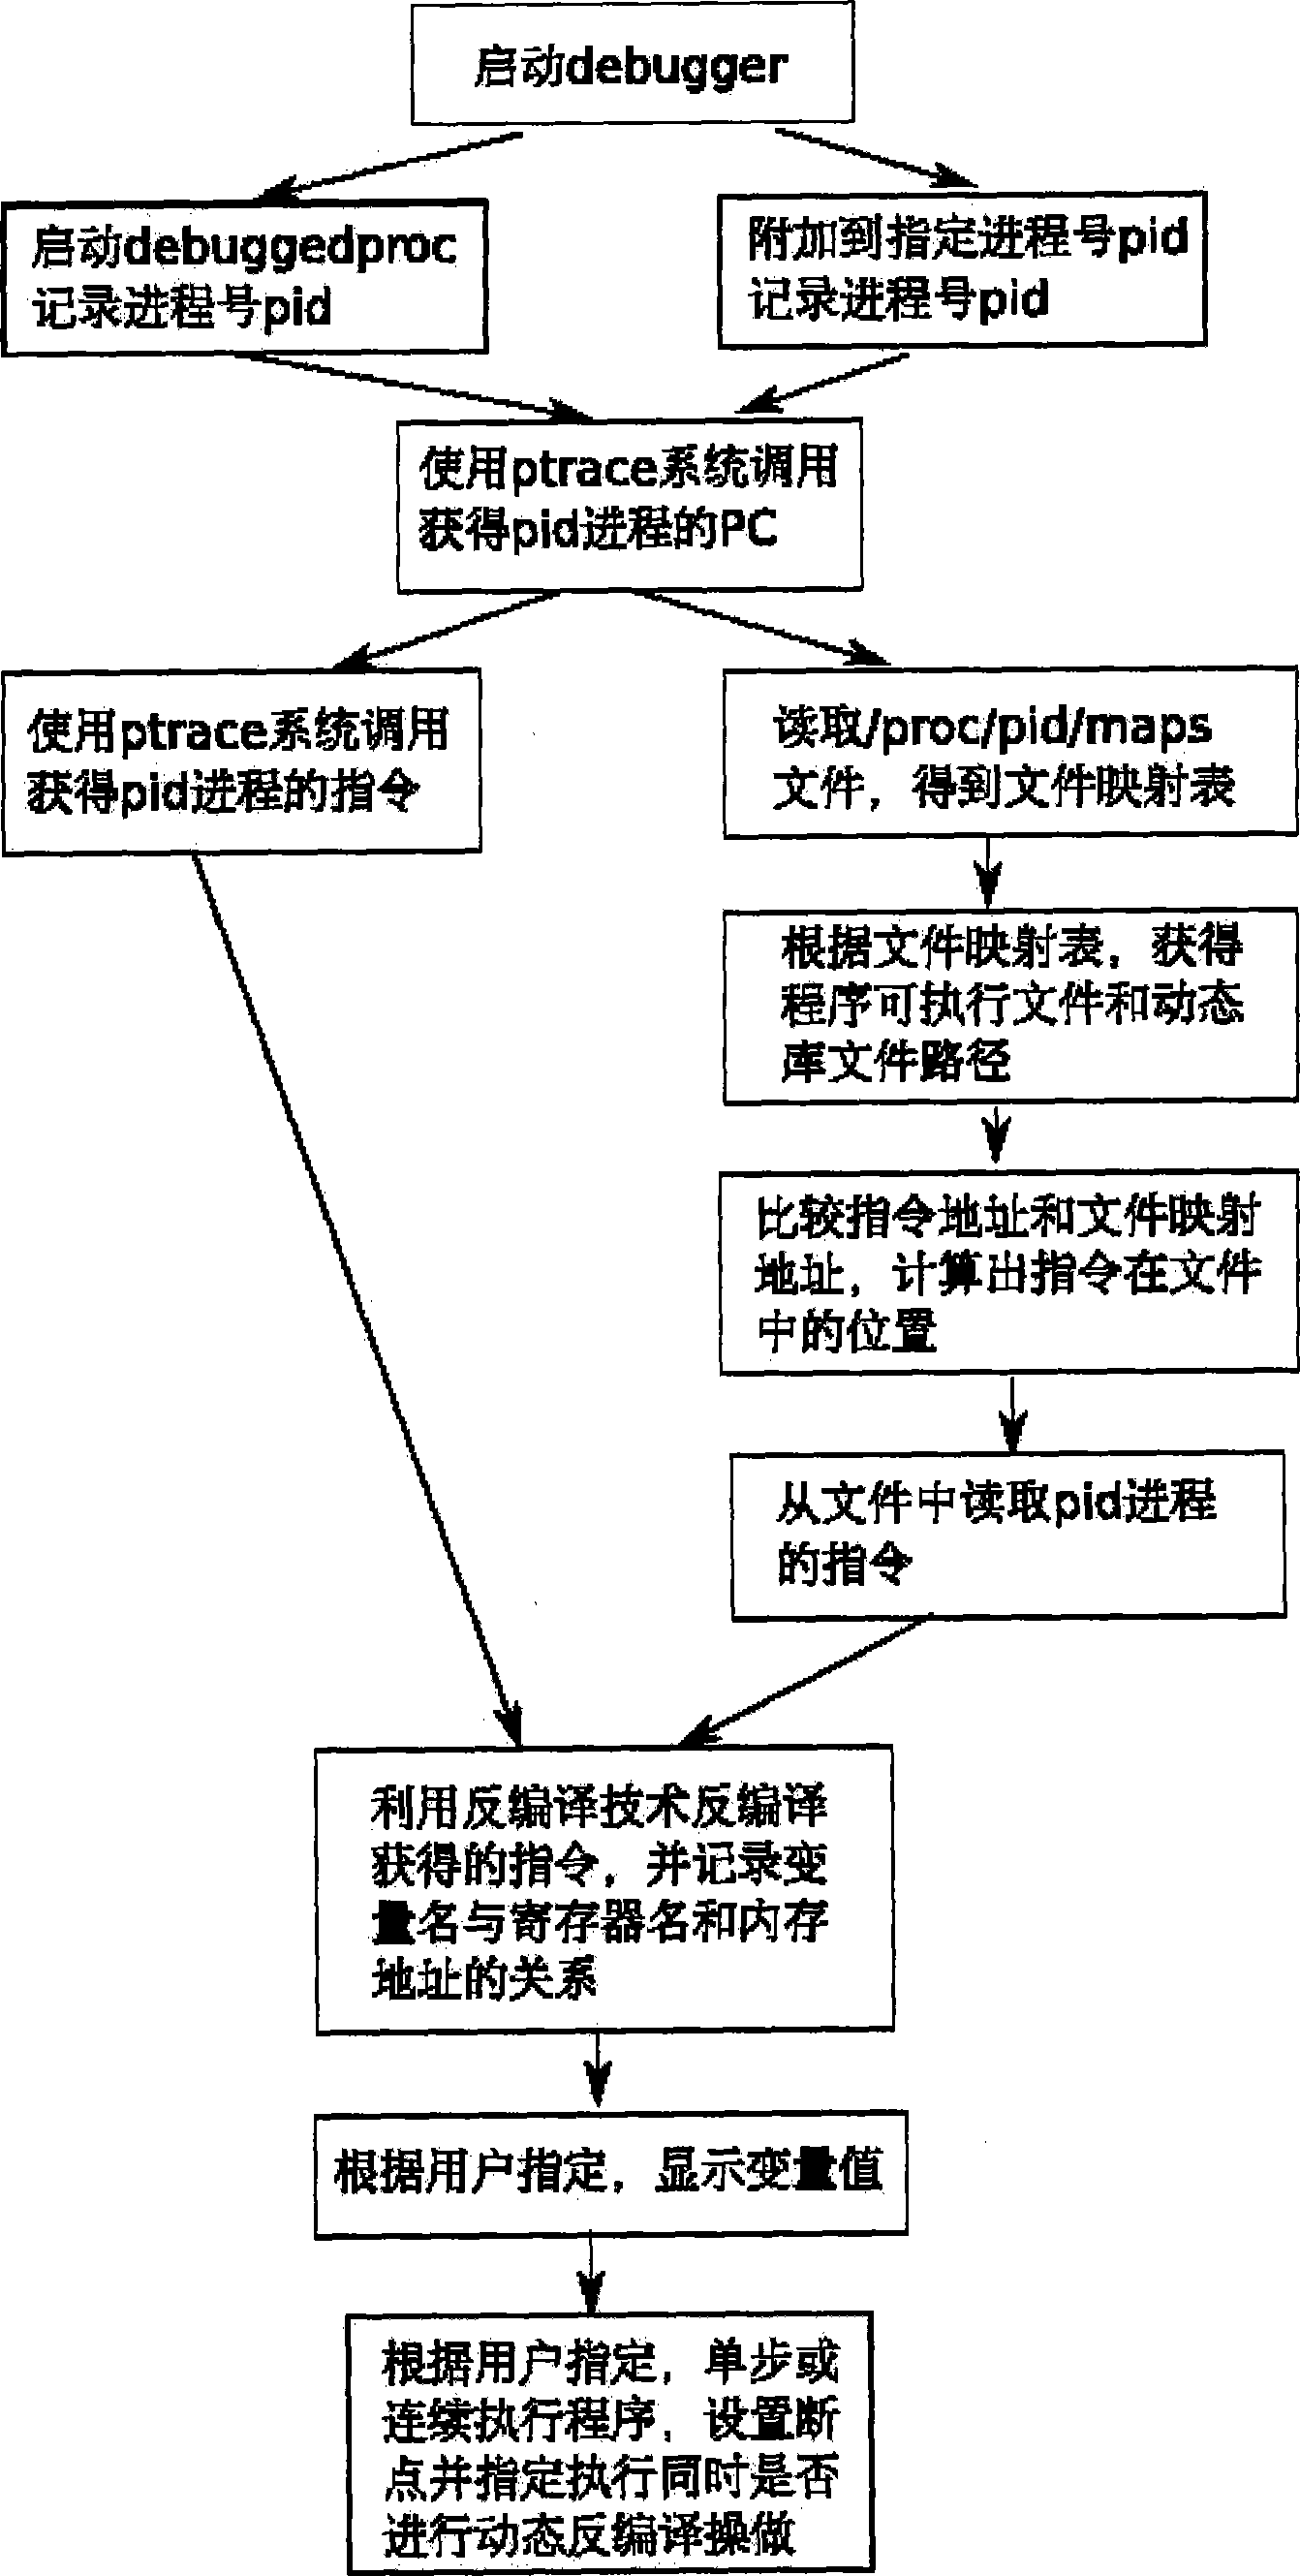 Method for debugging binary application program based on dynamic inverse compiling technique